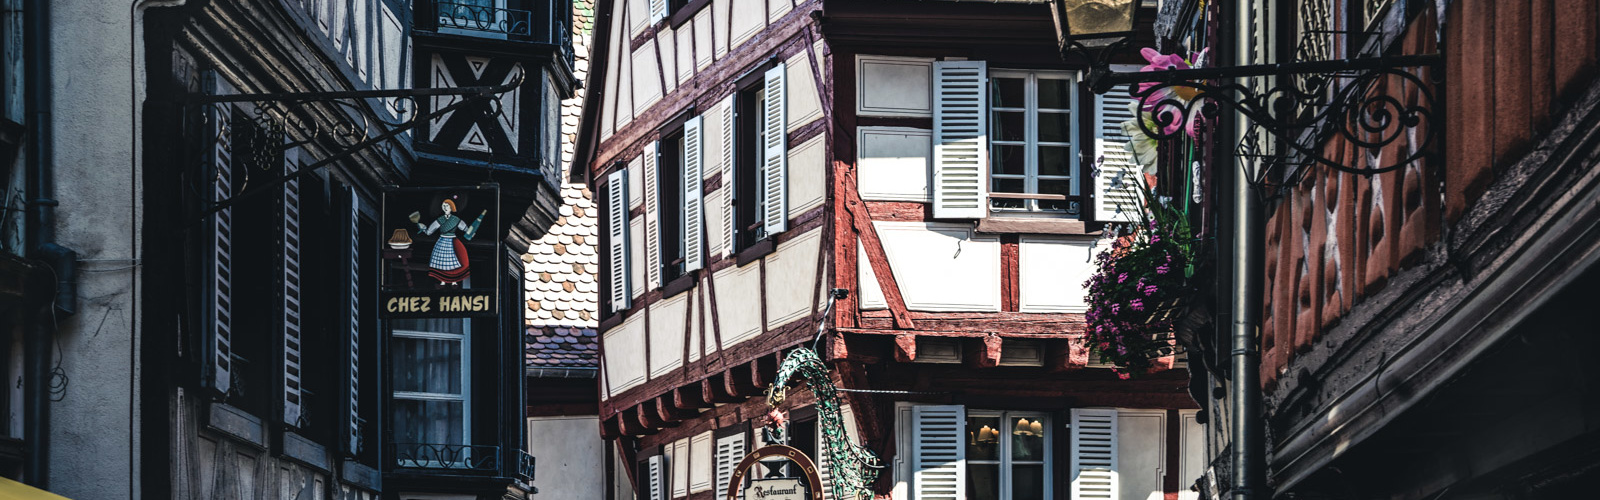 Strolling through Charming Colmar: France’s Most Beautiful Town?